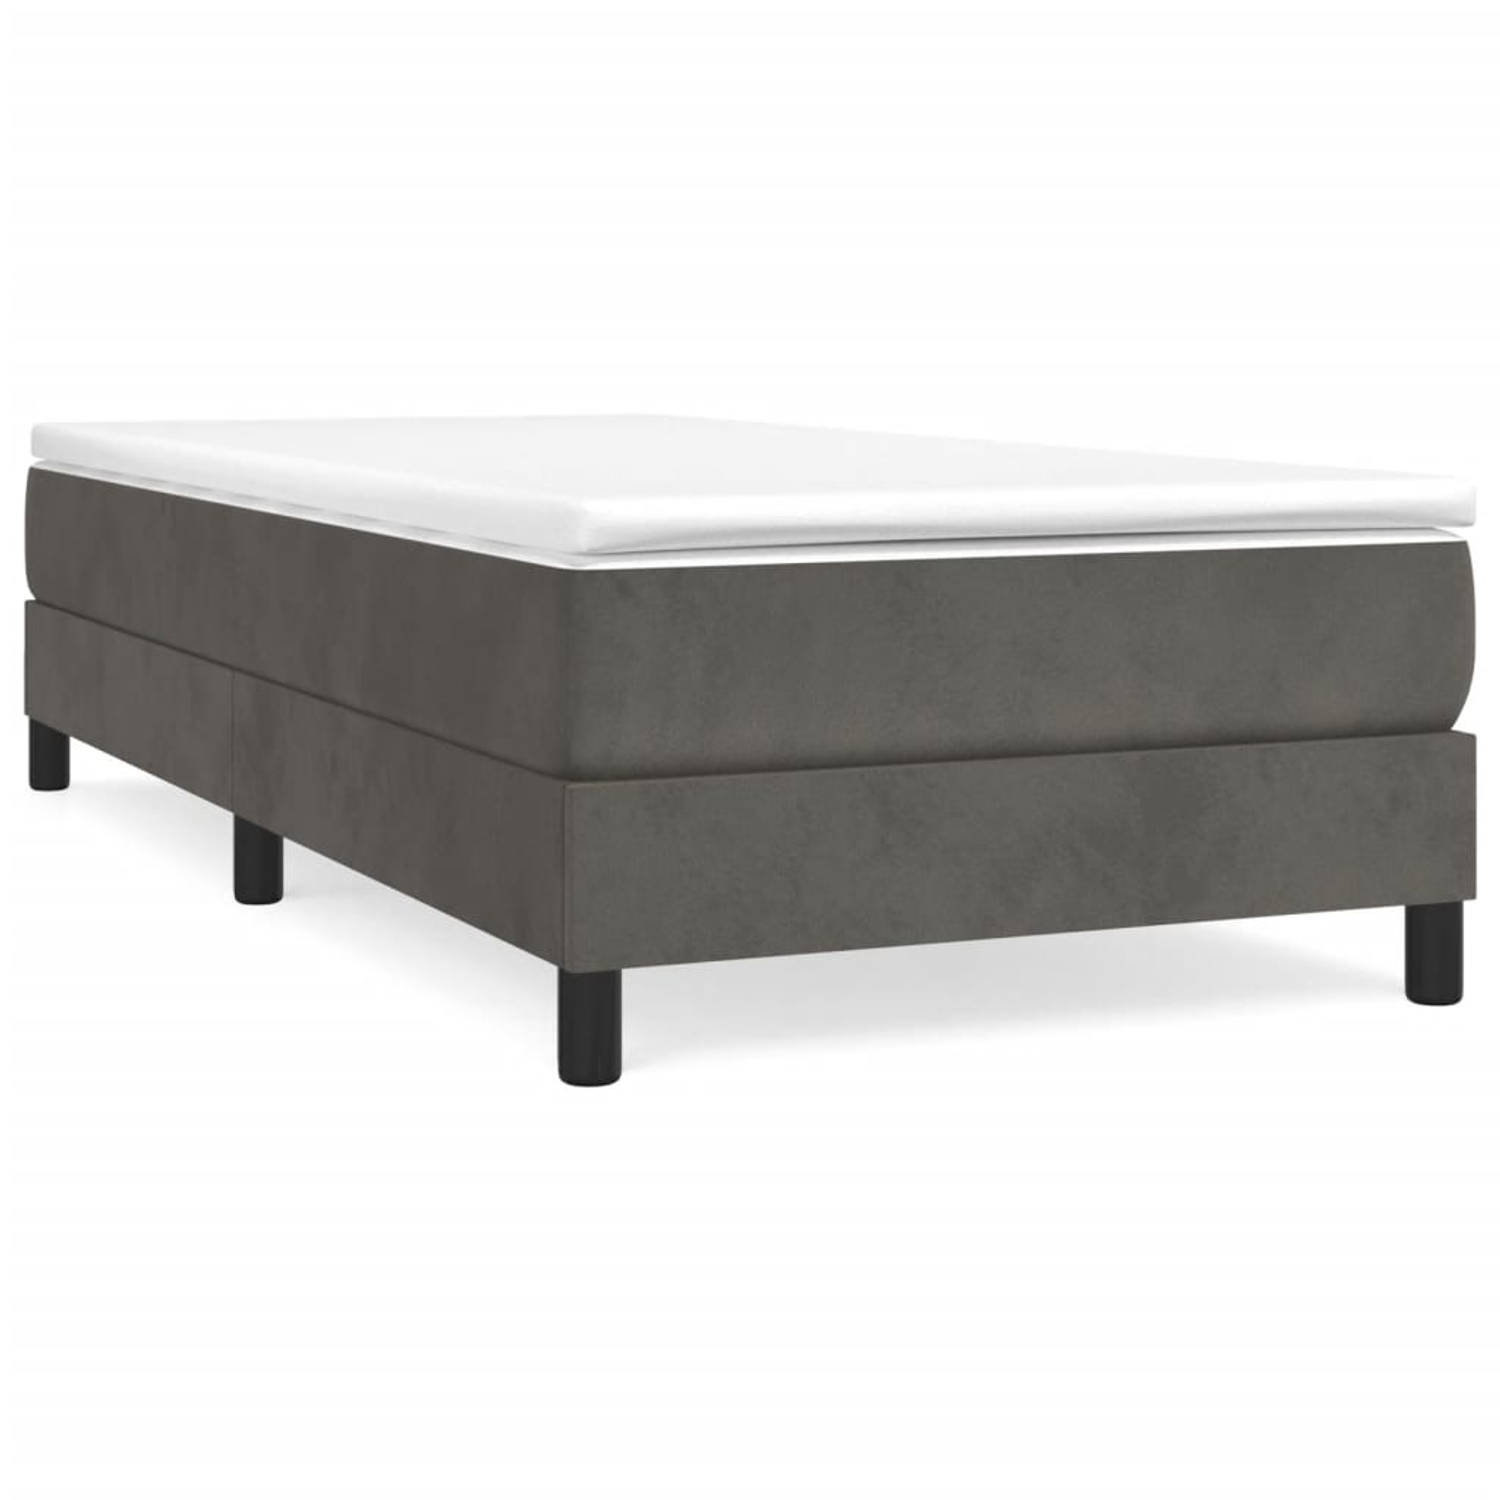 The Living Store Boxspringframe fluweel donkergrijs 90x200 cm - Bed